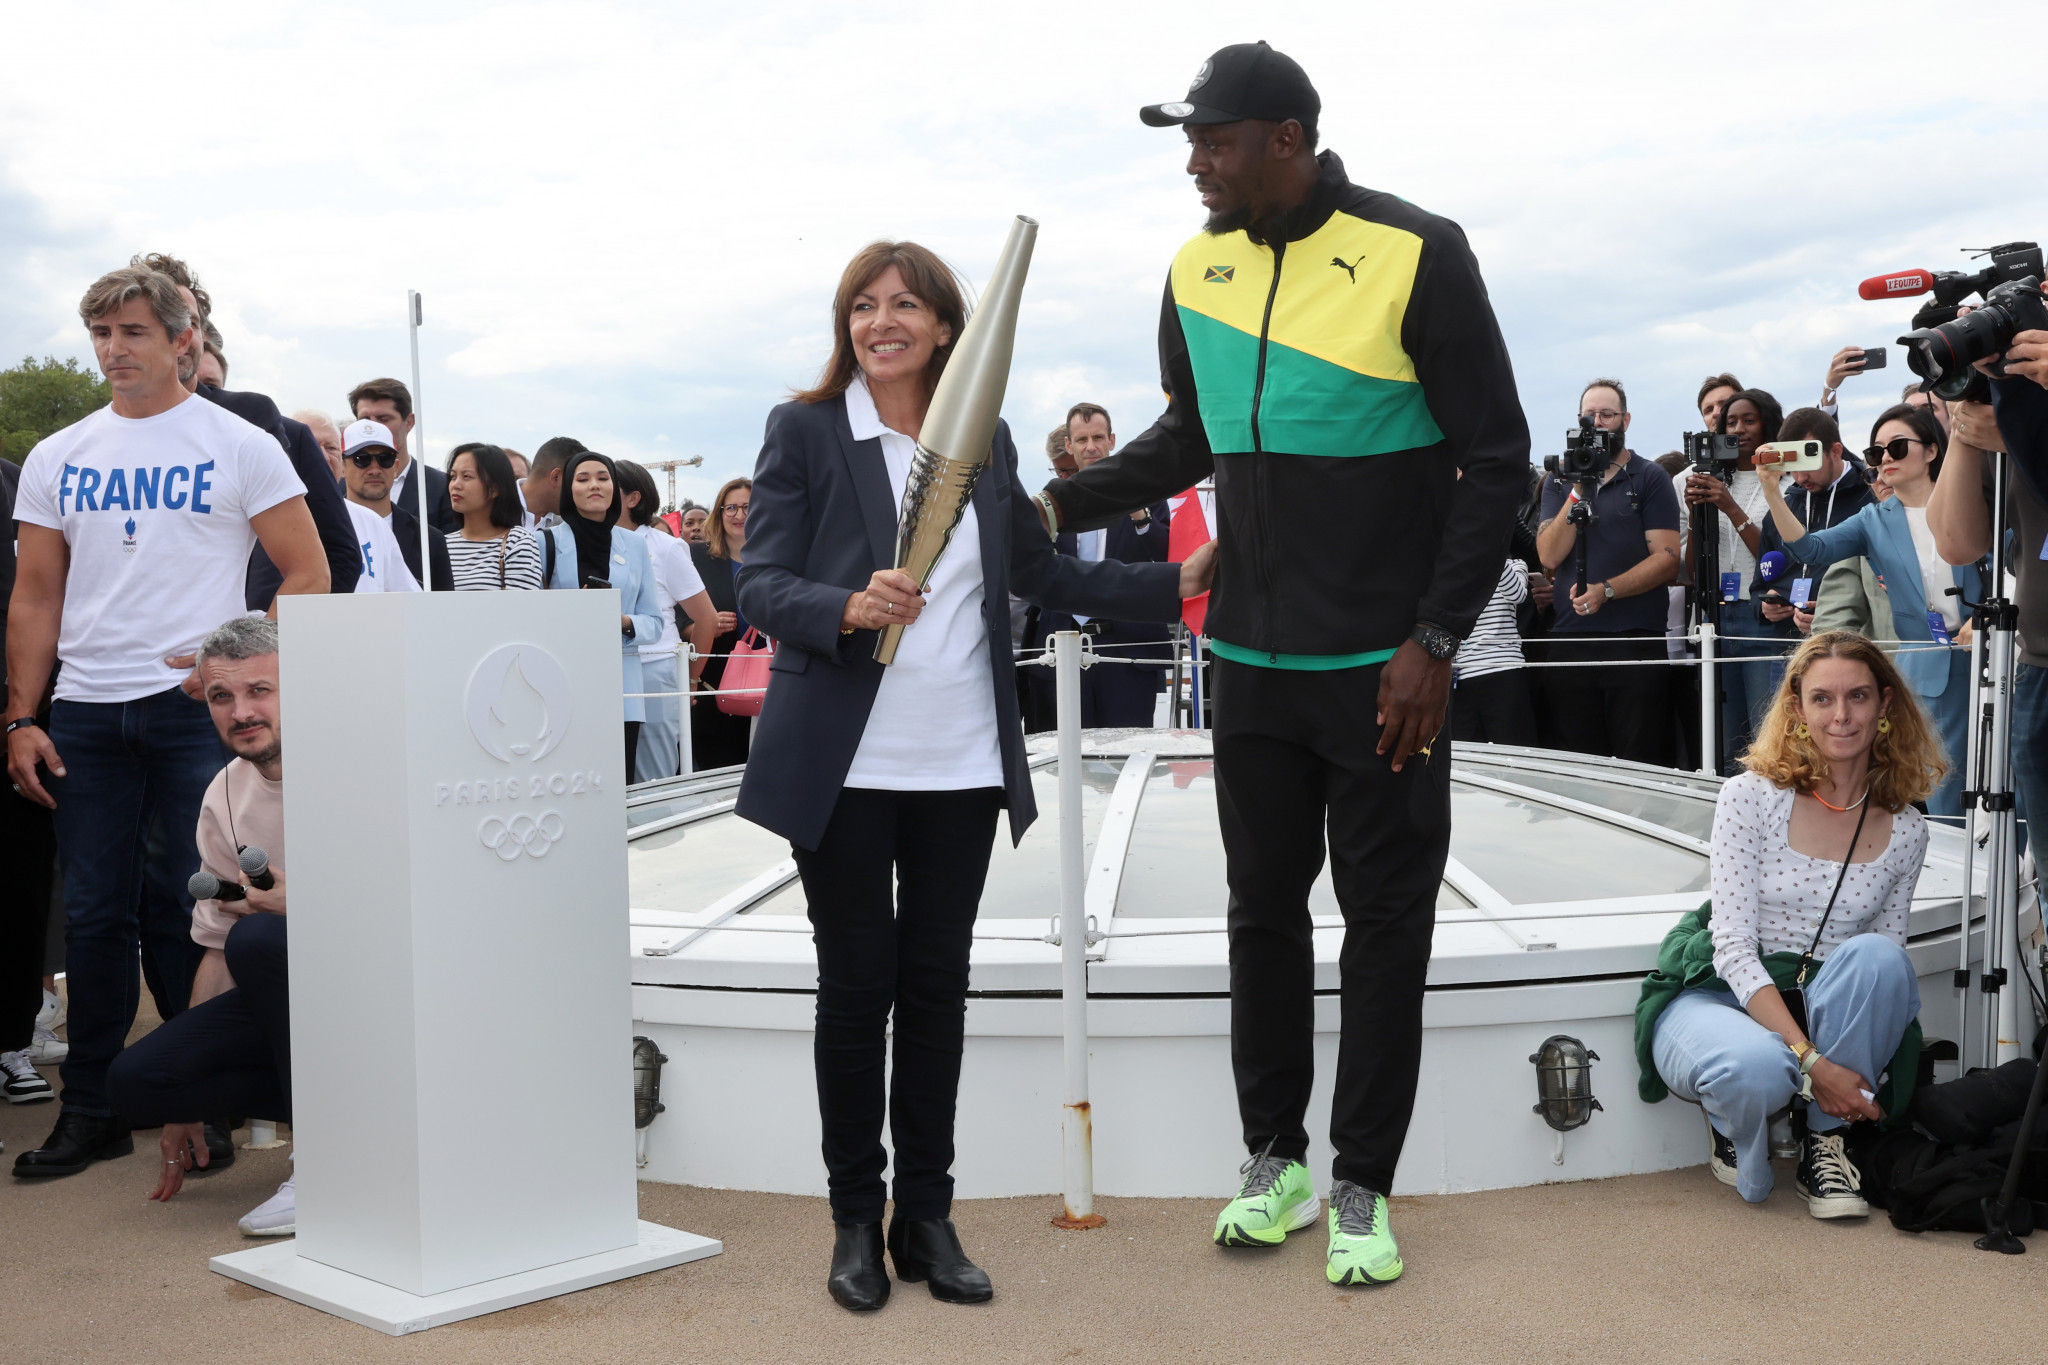 Paris Mayor Anne Hidalgo holds the Olympic torch next to Former sprinter Usain Bolt during a Pre-Olympic tour along the Seine with the Eiffel Tower in the background © Getty Images